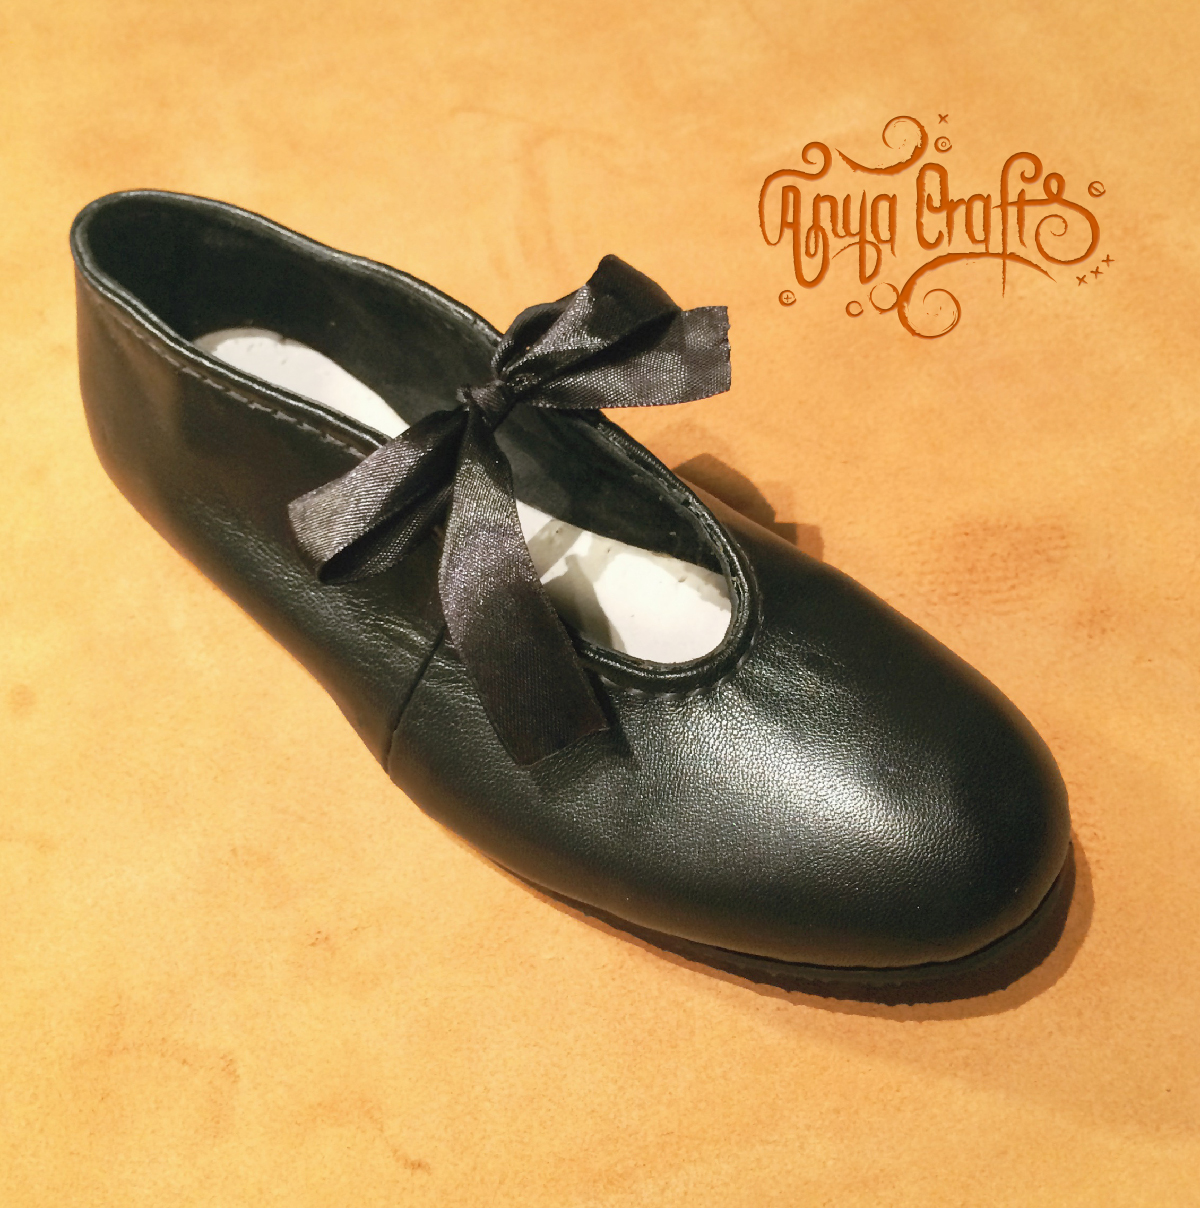 shoes shoe leather crafts   anya crafts aria pedrosa costume shoes